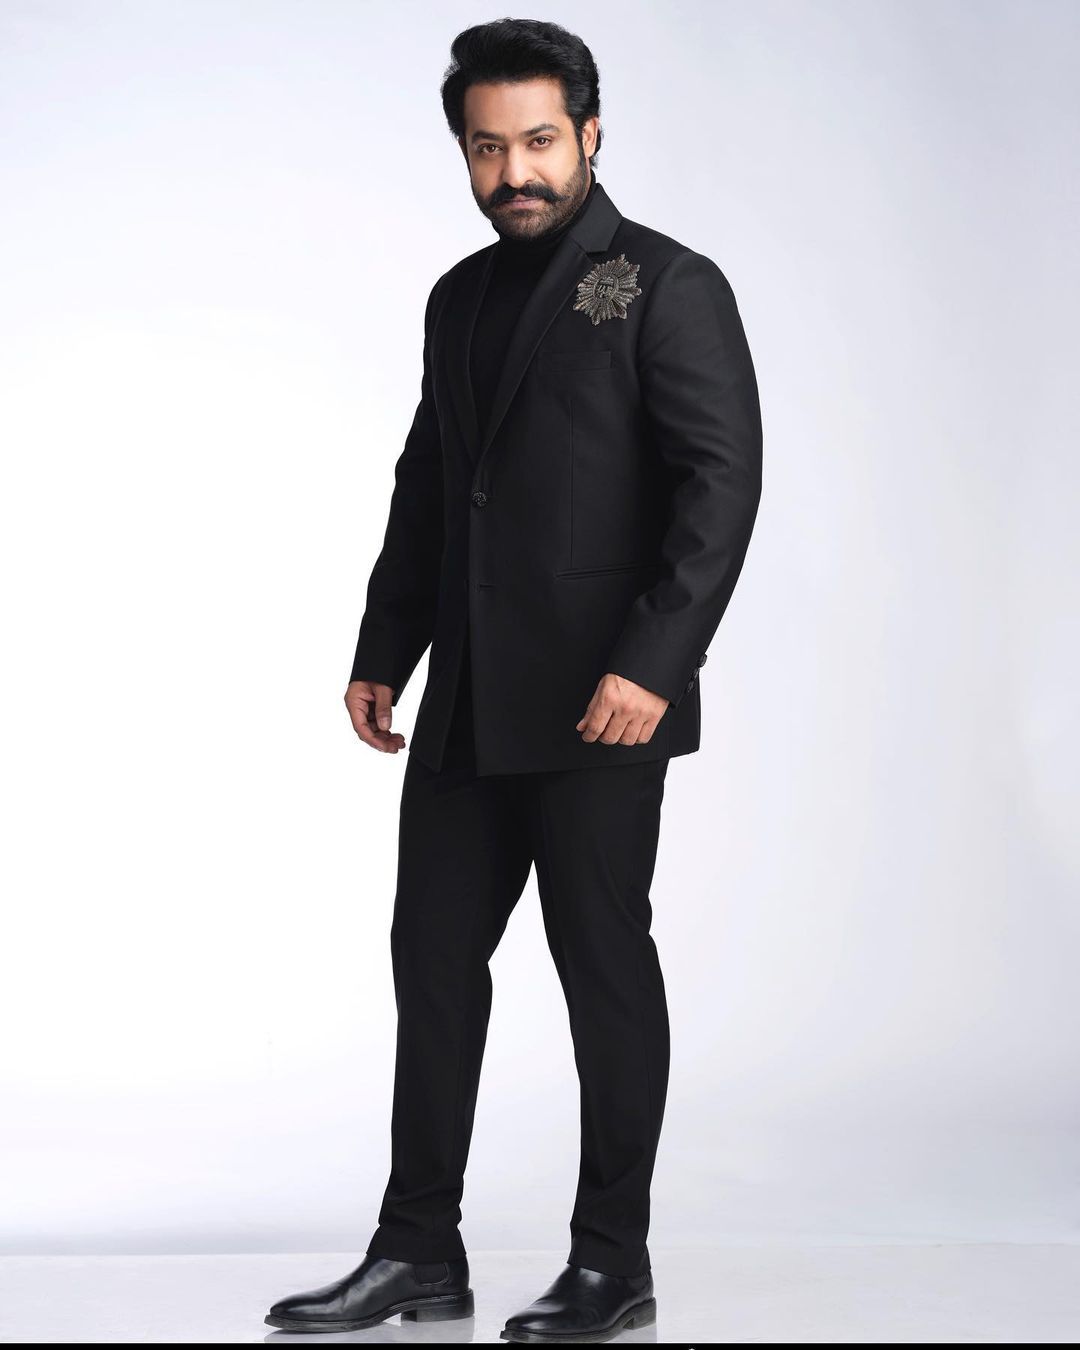 Jr. NTR Tests Negative For Covid-19, Says "Your Will Power Is Your Biggest Weapon In This Fight"